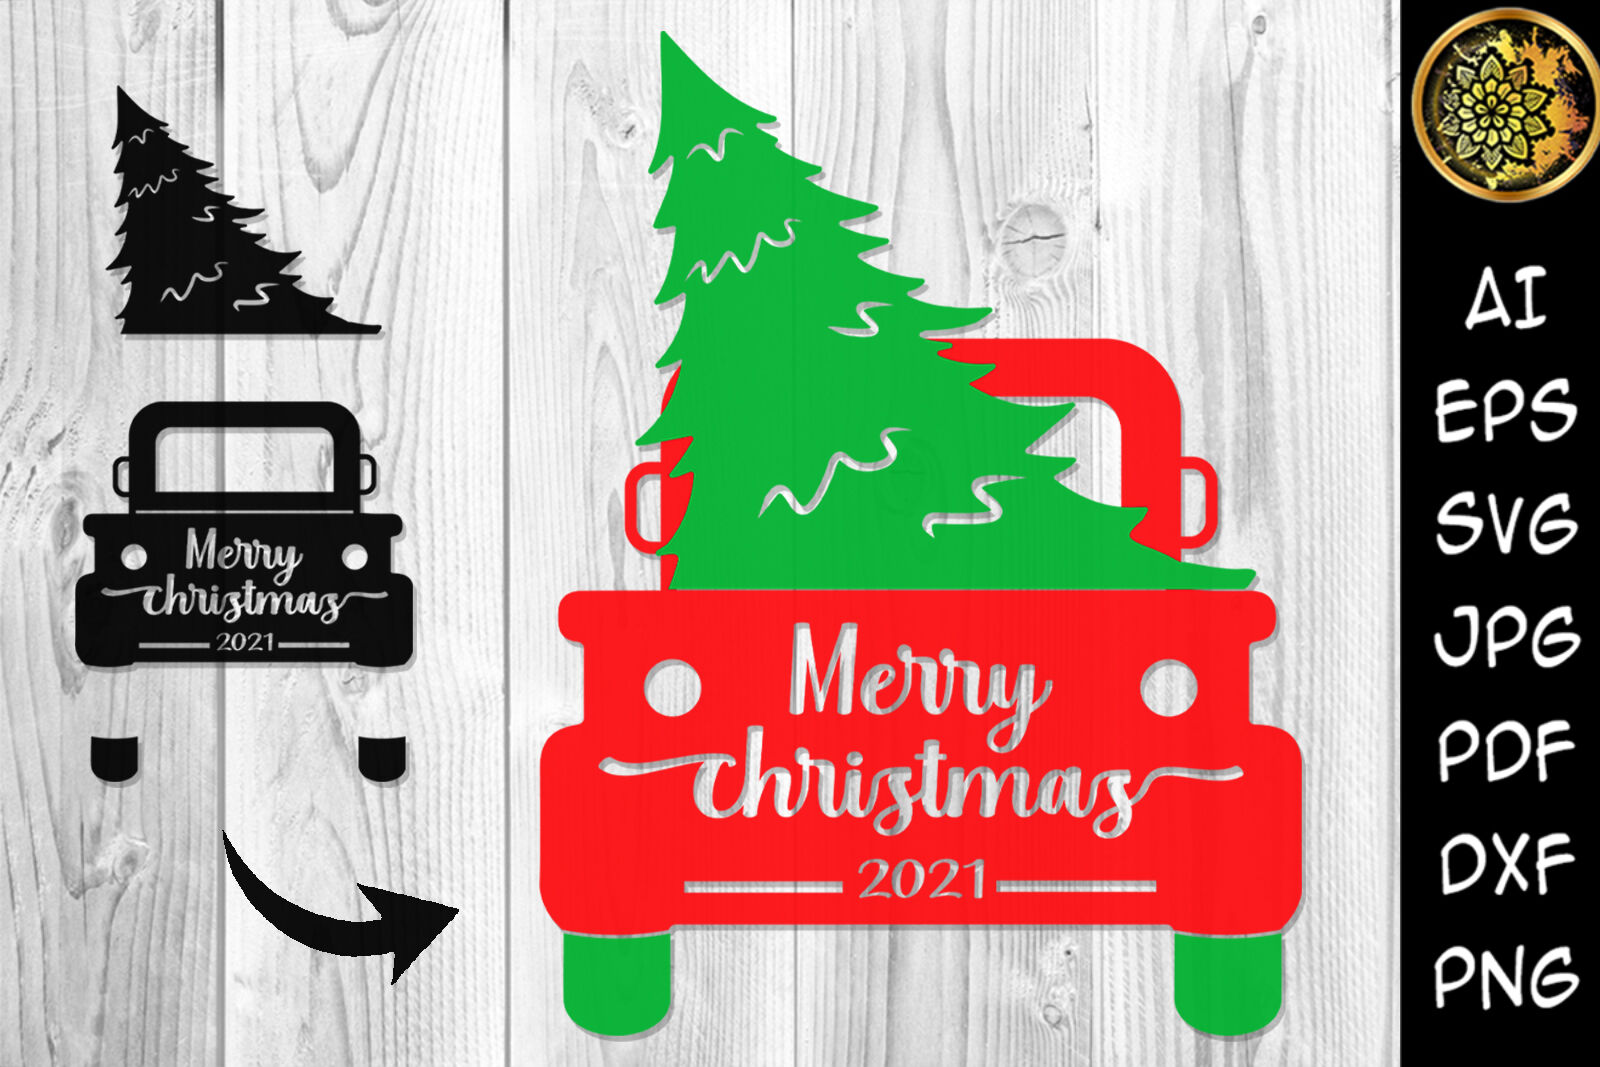 Merry Christmas 2021 Tree and Truck SVG Clipart By Mandala Creator